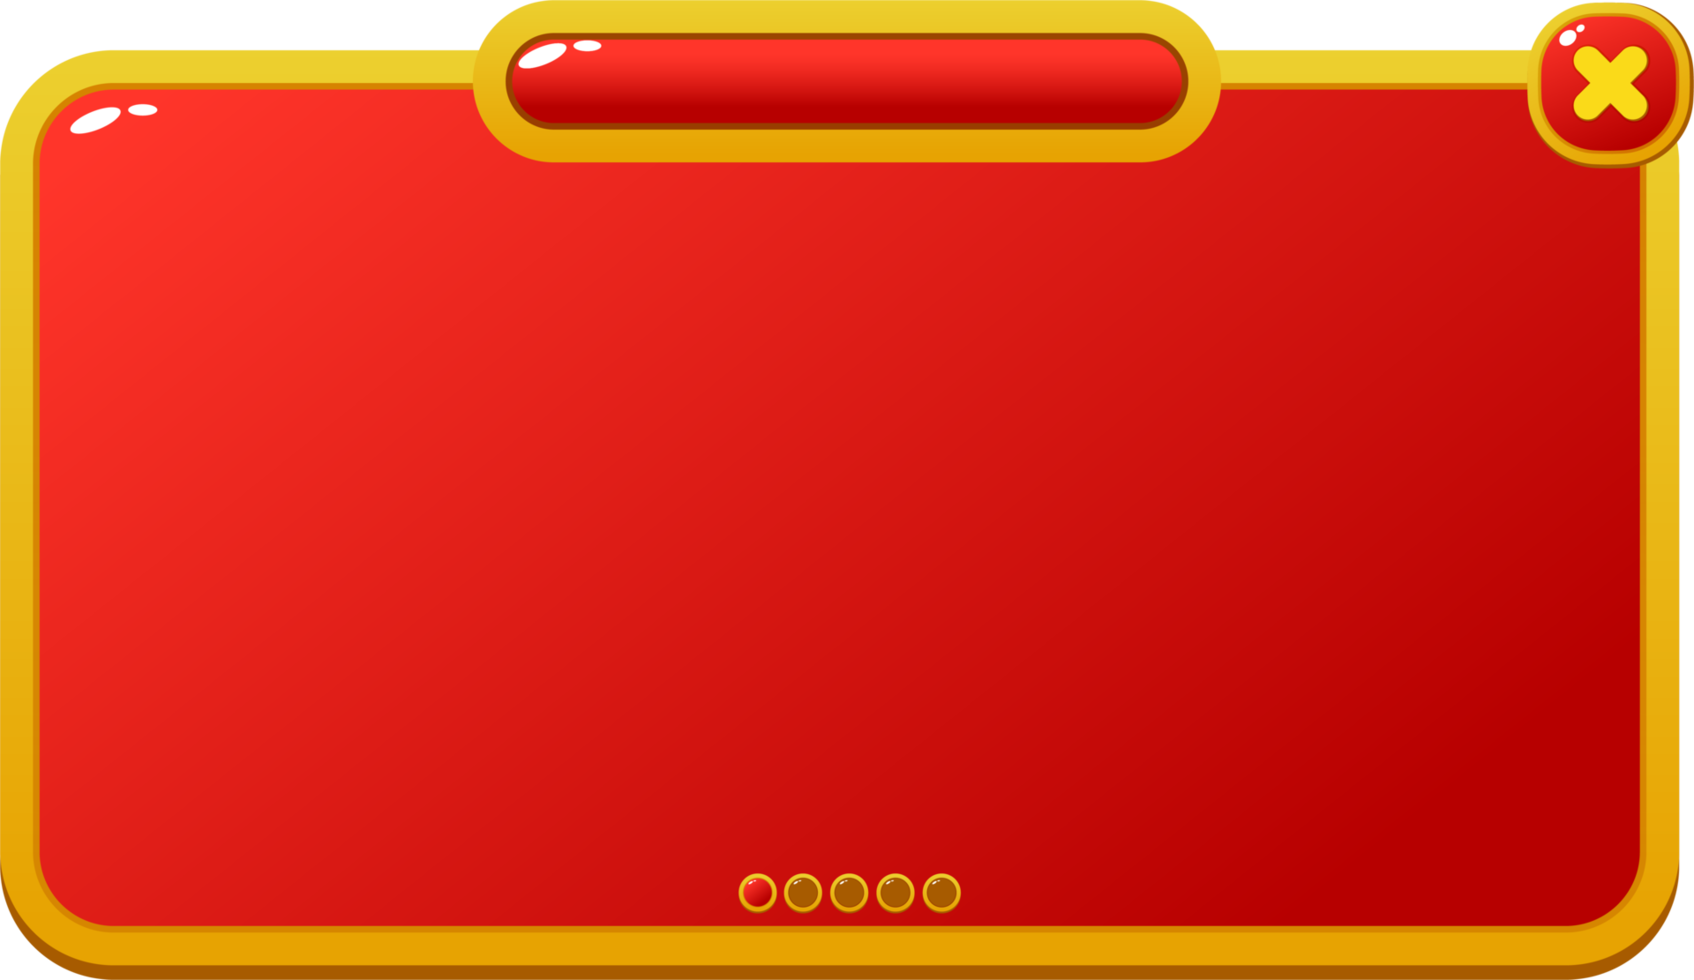 buttons and frames for game interface png